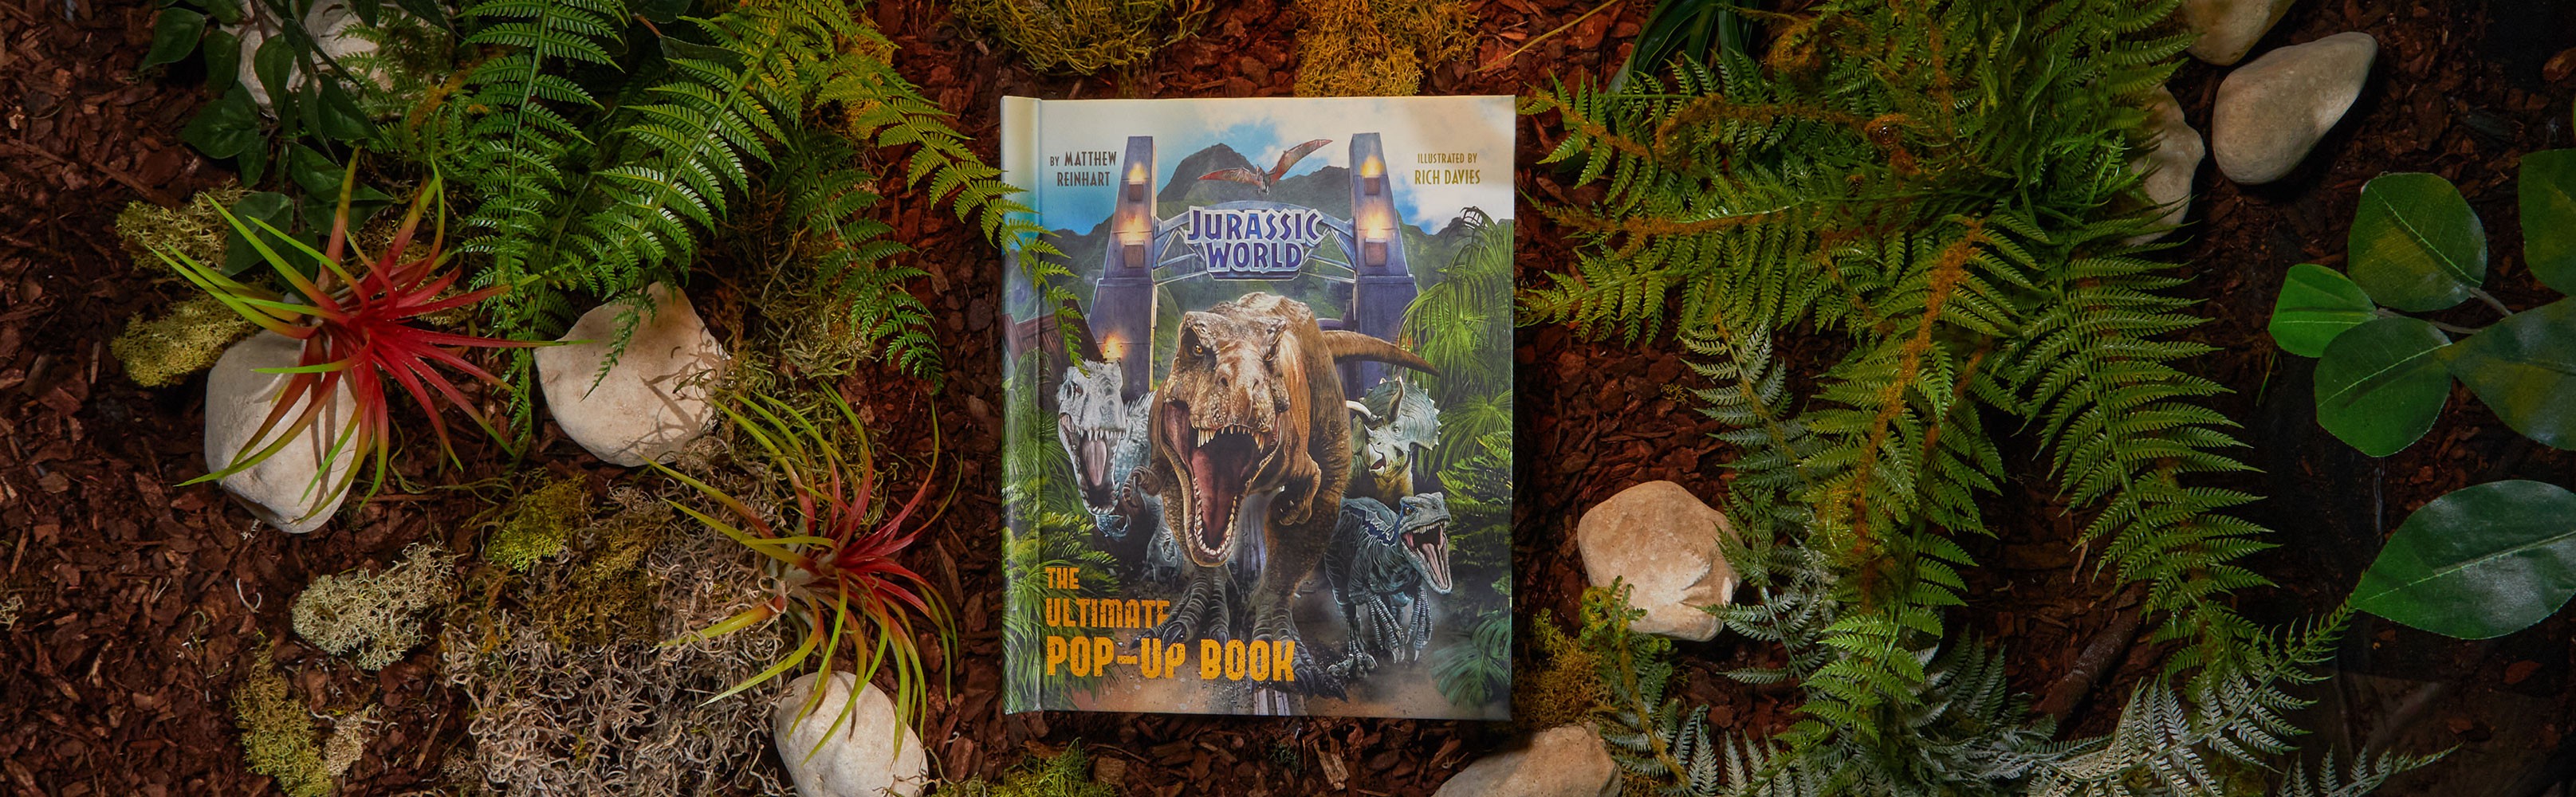 Jurassic World: The Ultimate Pop-Up View 1